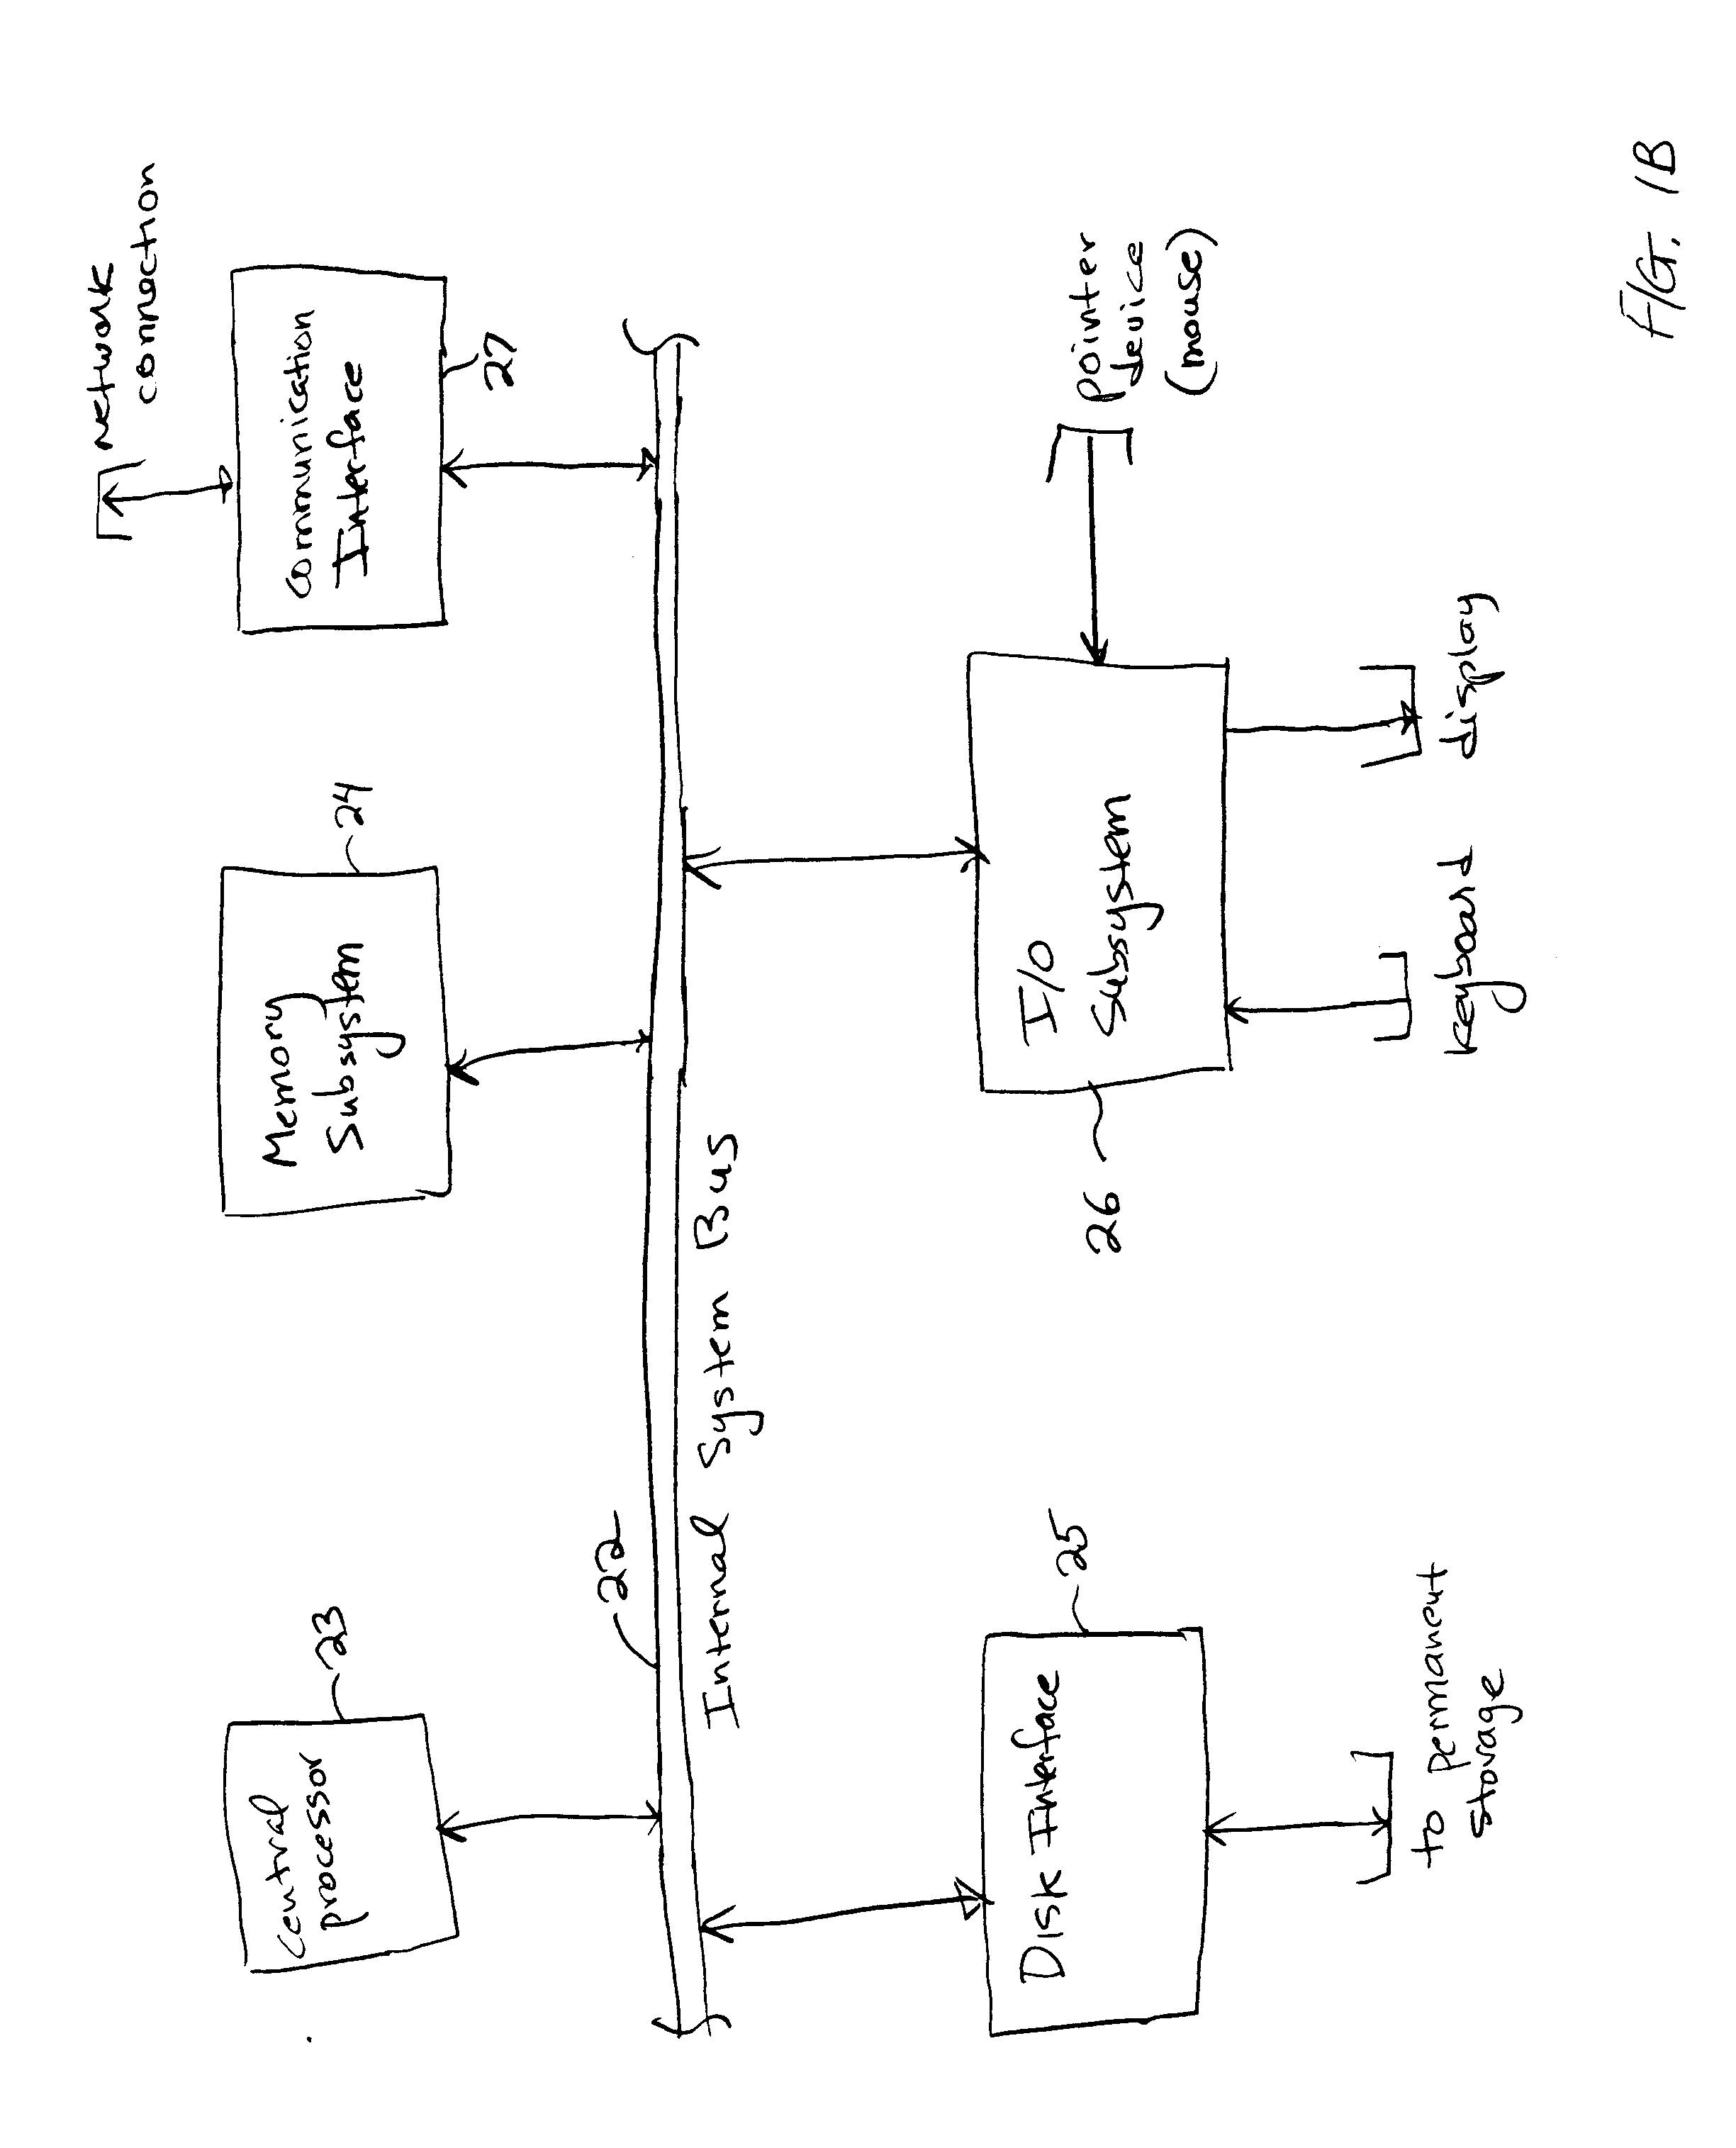 System and Method for Automating Listing and Re-Listing of Auction Items